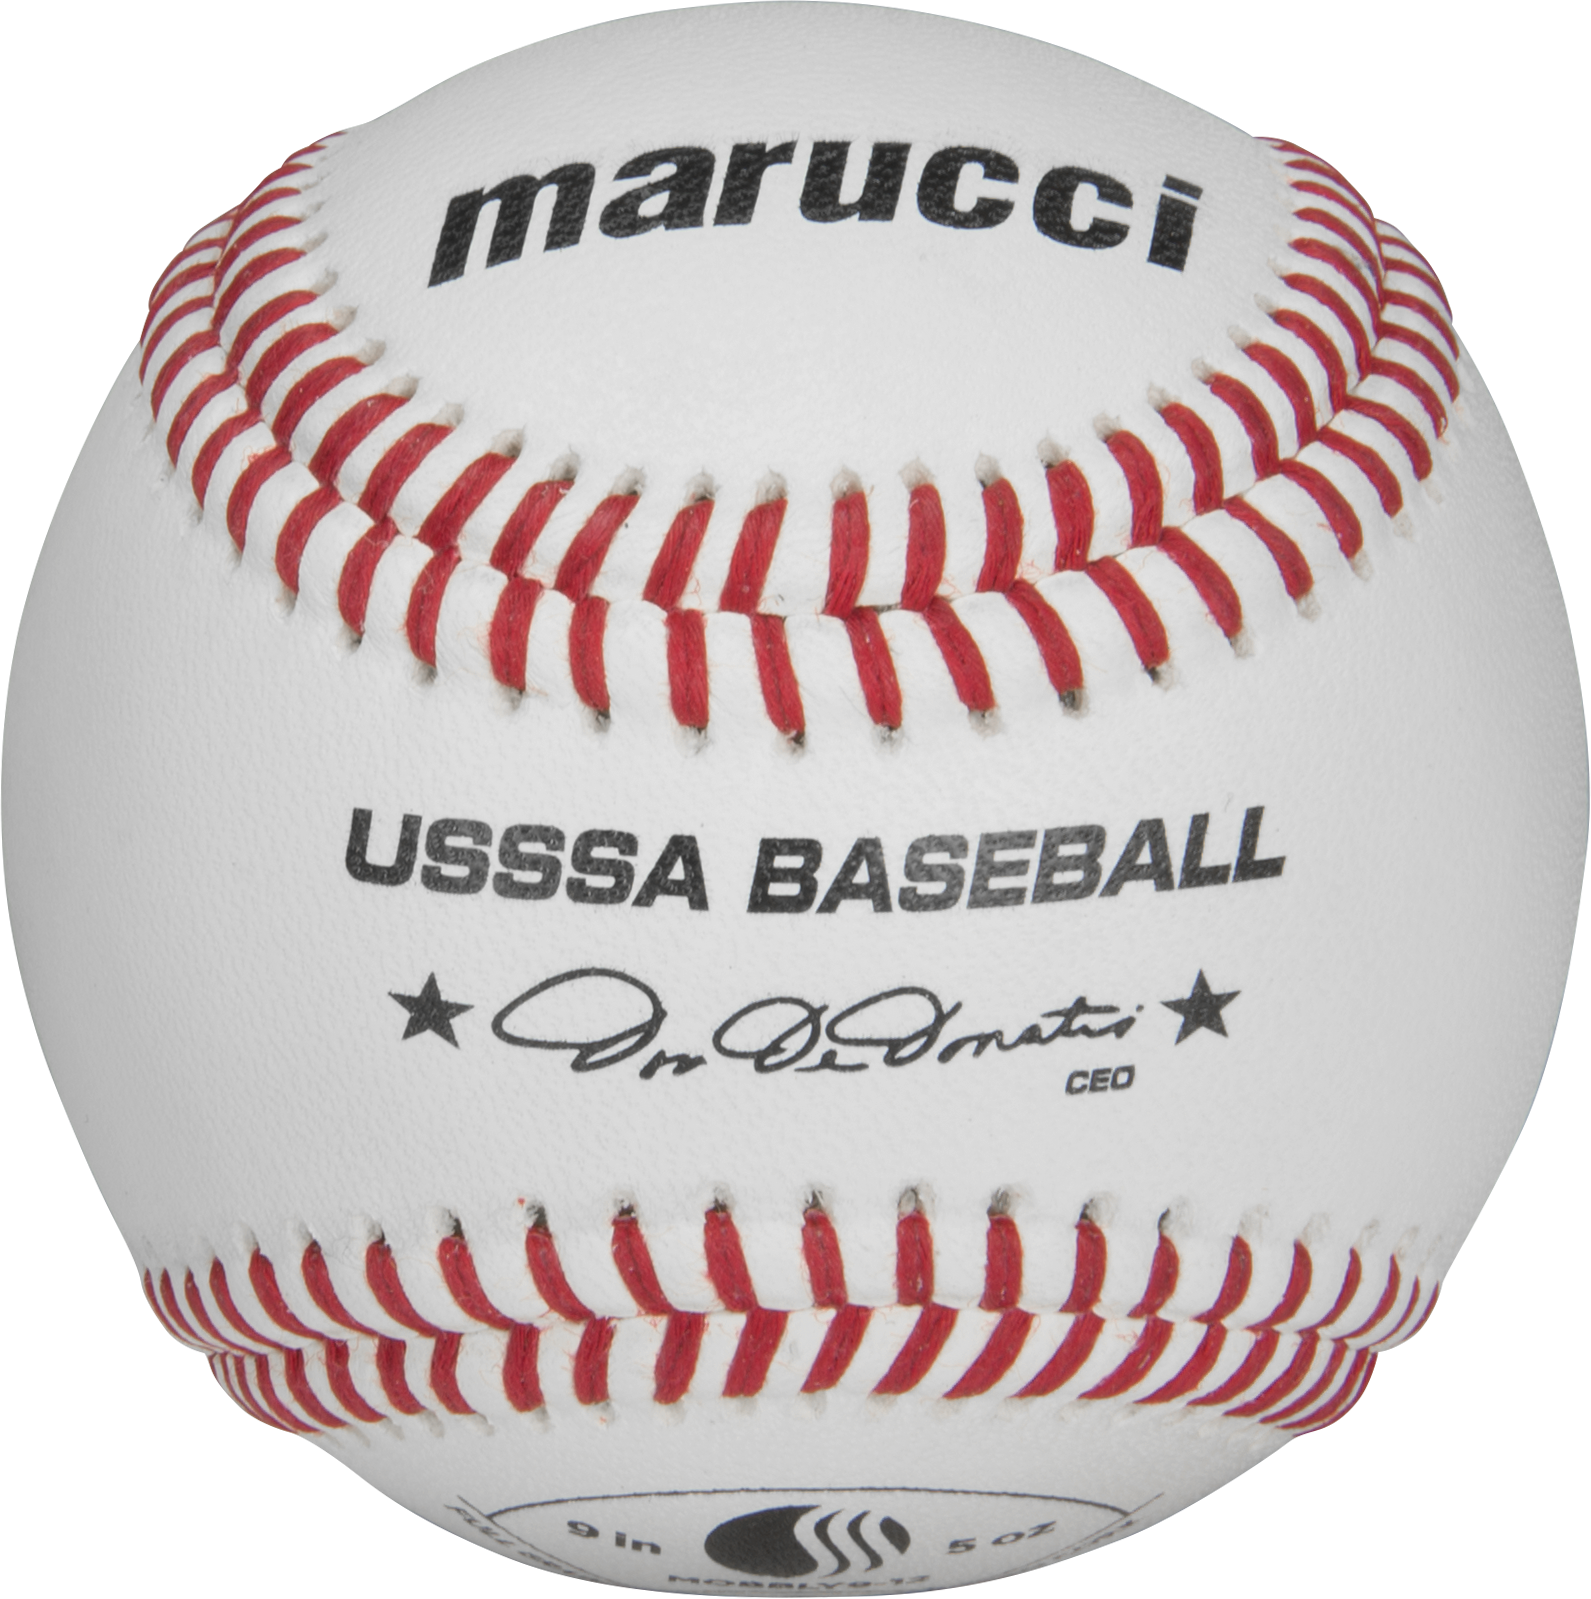 Consistency and craftsmanship Commitment to quality and understanding of players' Designed with the player in mind Professional quality materials Used by the best in the leauge. Marucci sports, MOBBLRY9-12, USSSA Youth certified baseballs-retail pack, as a company founded, majority-owned, and operated by current and former big Leaguers, Marucci is dedicated to quality and committed to providing players at every level with the tools they want and need to be successful. Based in baton Rouge, Louisiana, Marucci was founded by two former big Leaguers and their athletic trainer who began handcrafting bats for some of the best players in the game from their garage. Fast forward 10 years, and that dedication to quality and understanding of players needs has turned into an All-American success story. Today, Marucci is the new number one bat in the big leagues.